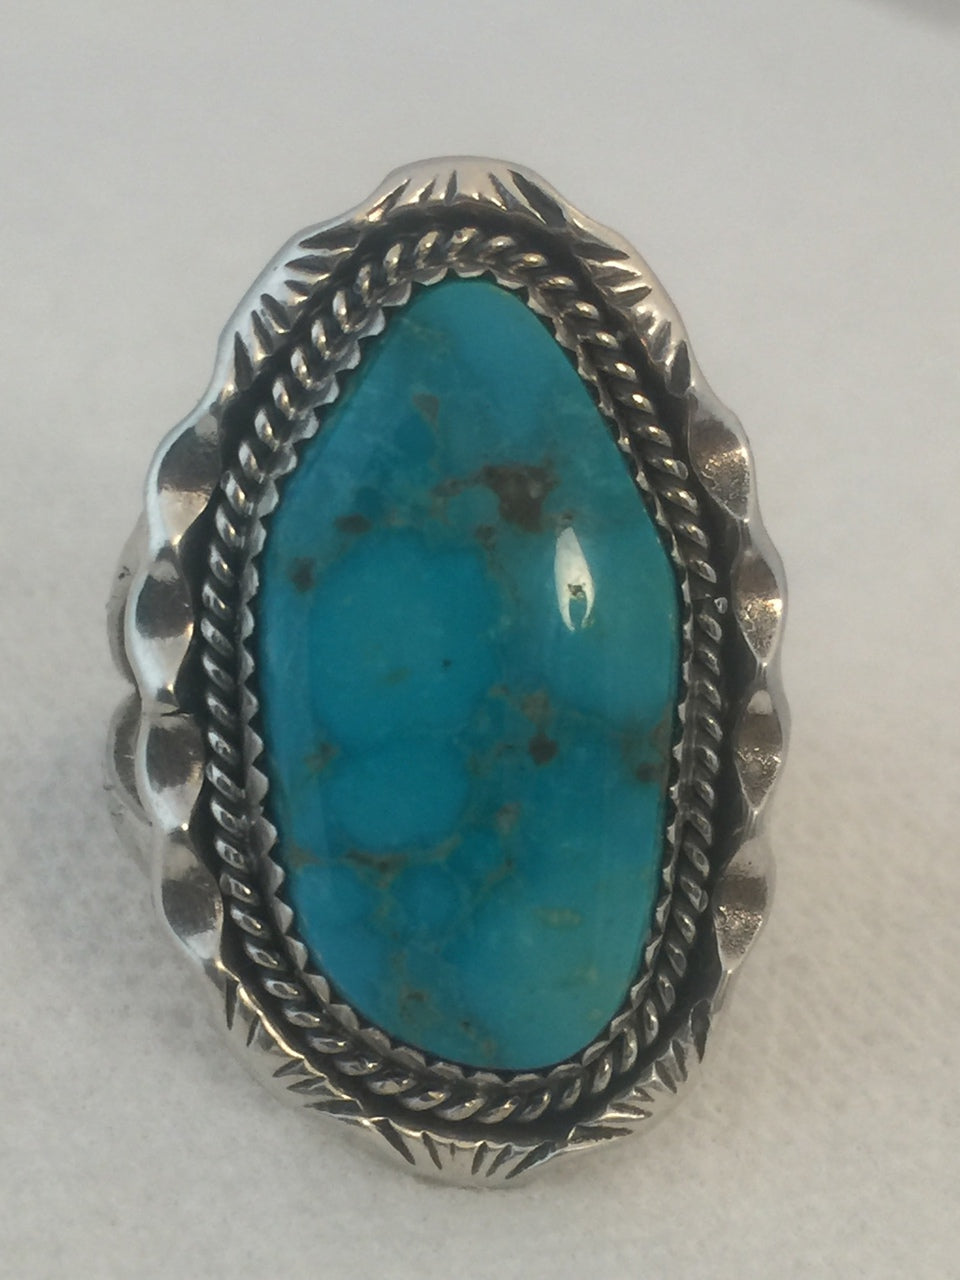 Vintage Native American Navajo Turquoise Ring Size 9.75 9.2g